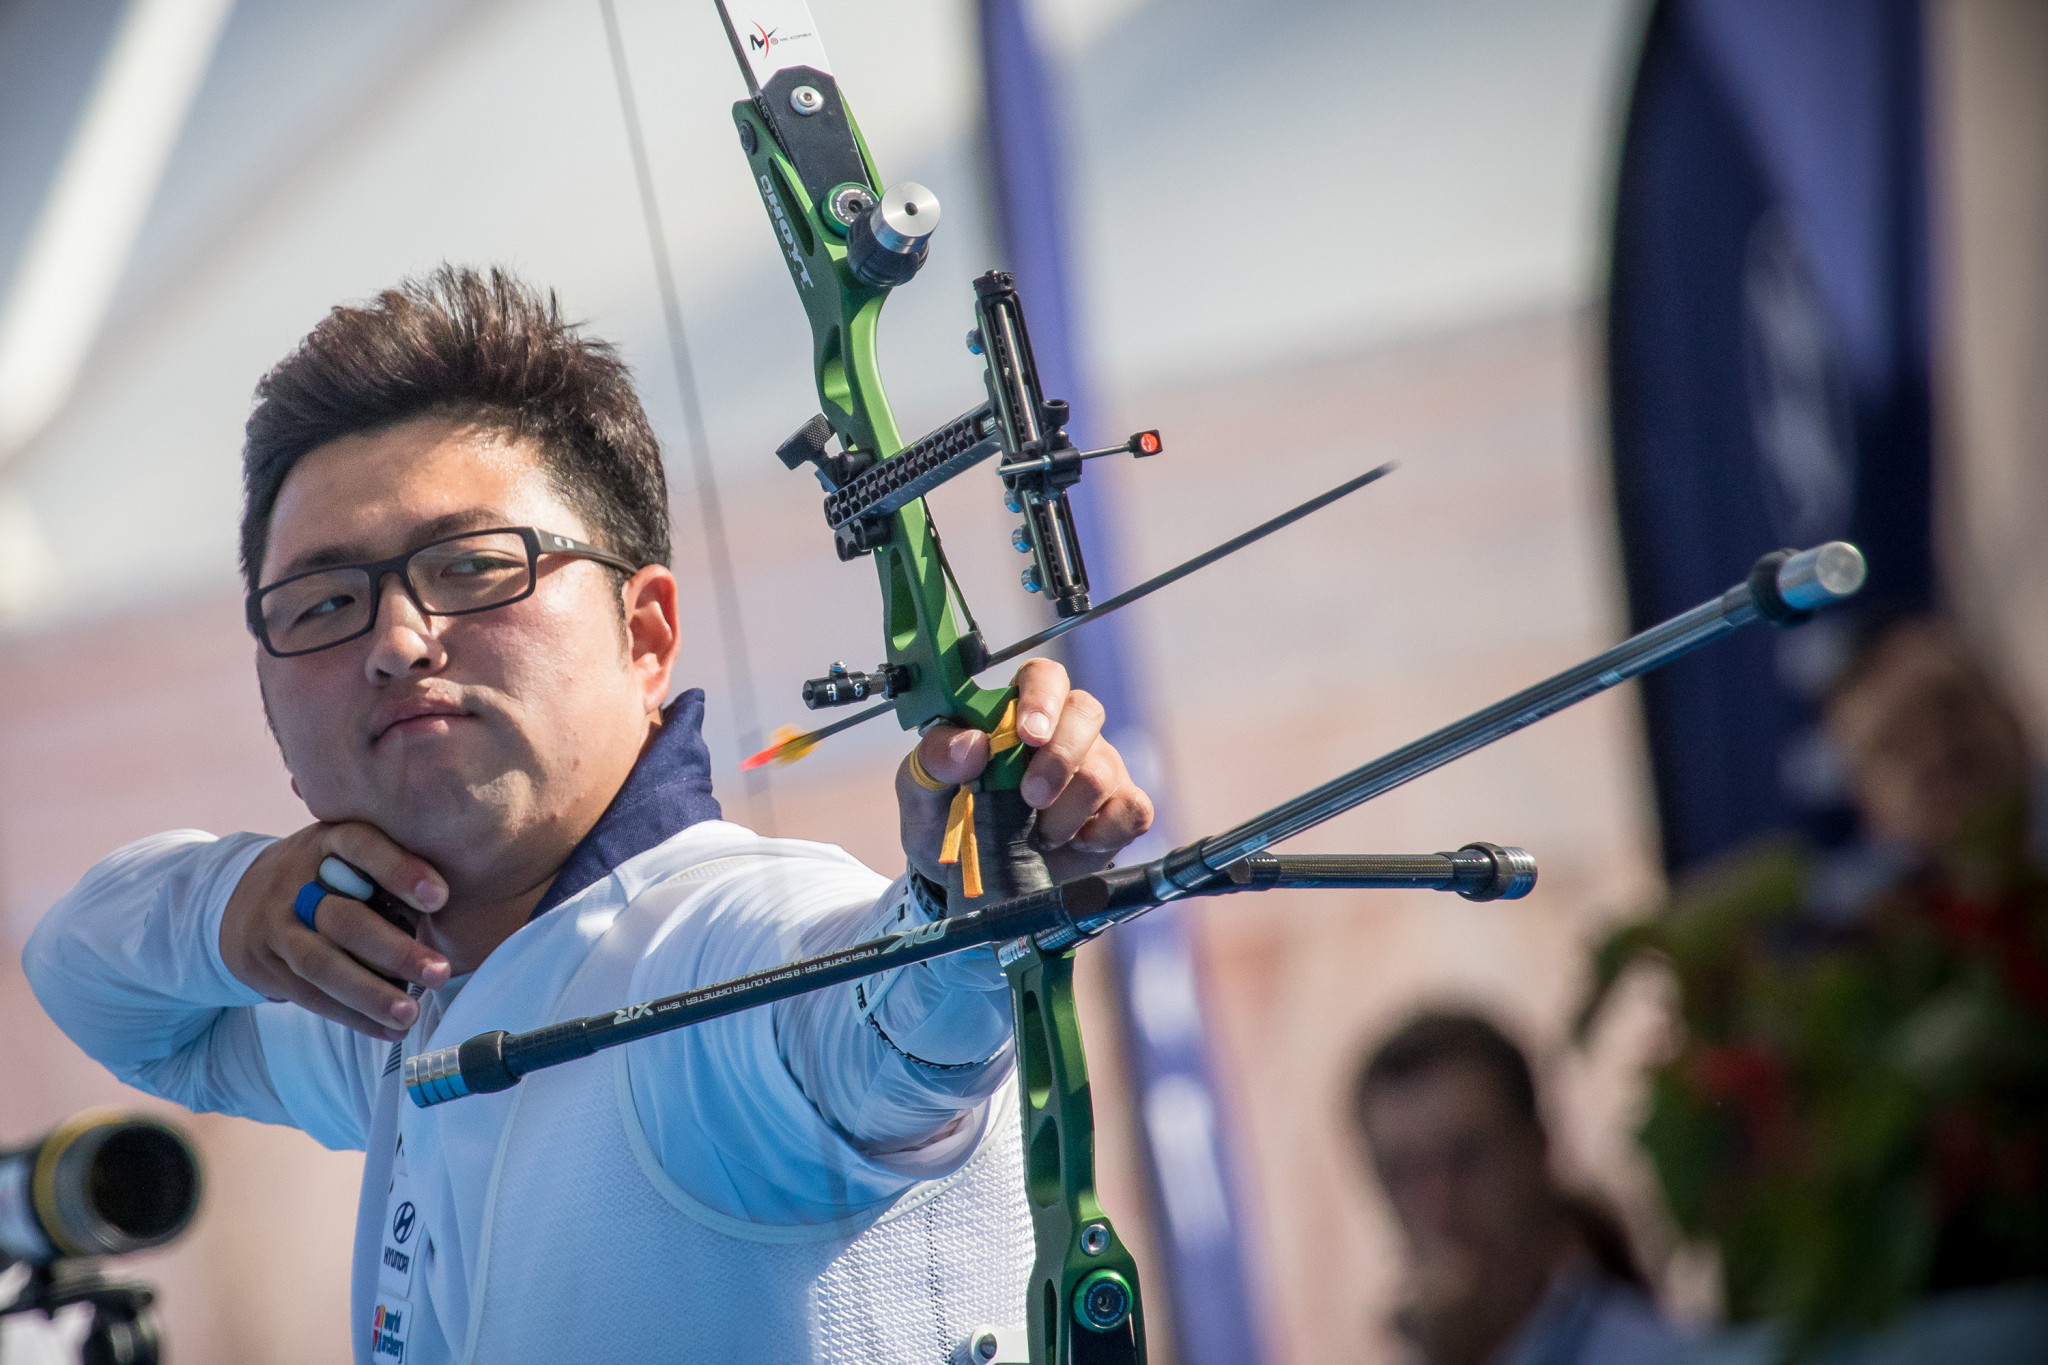 Kim aiming to make history at World Archery Championships in Mexico City